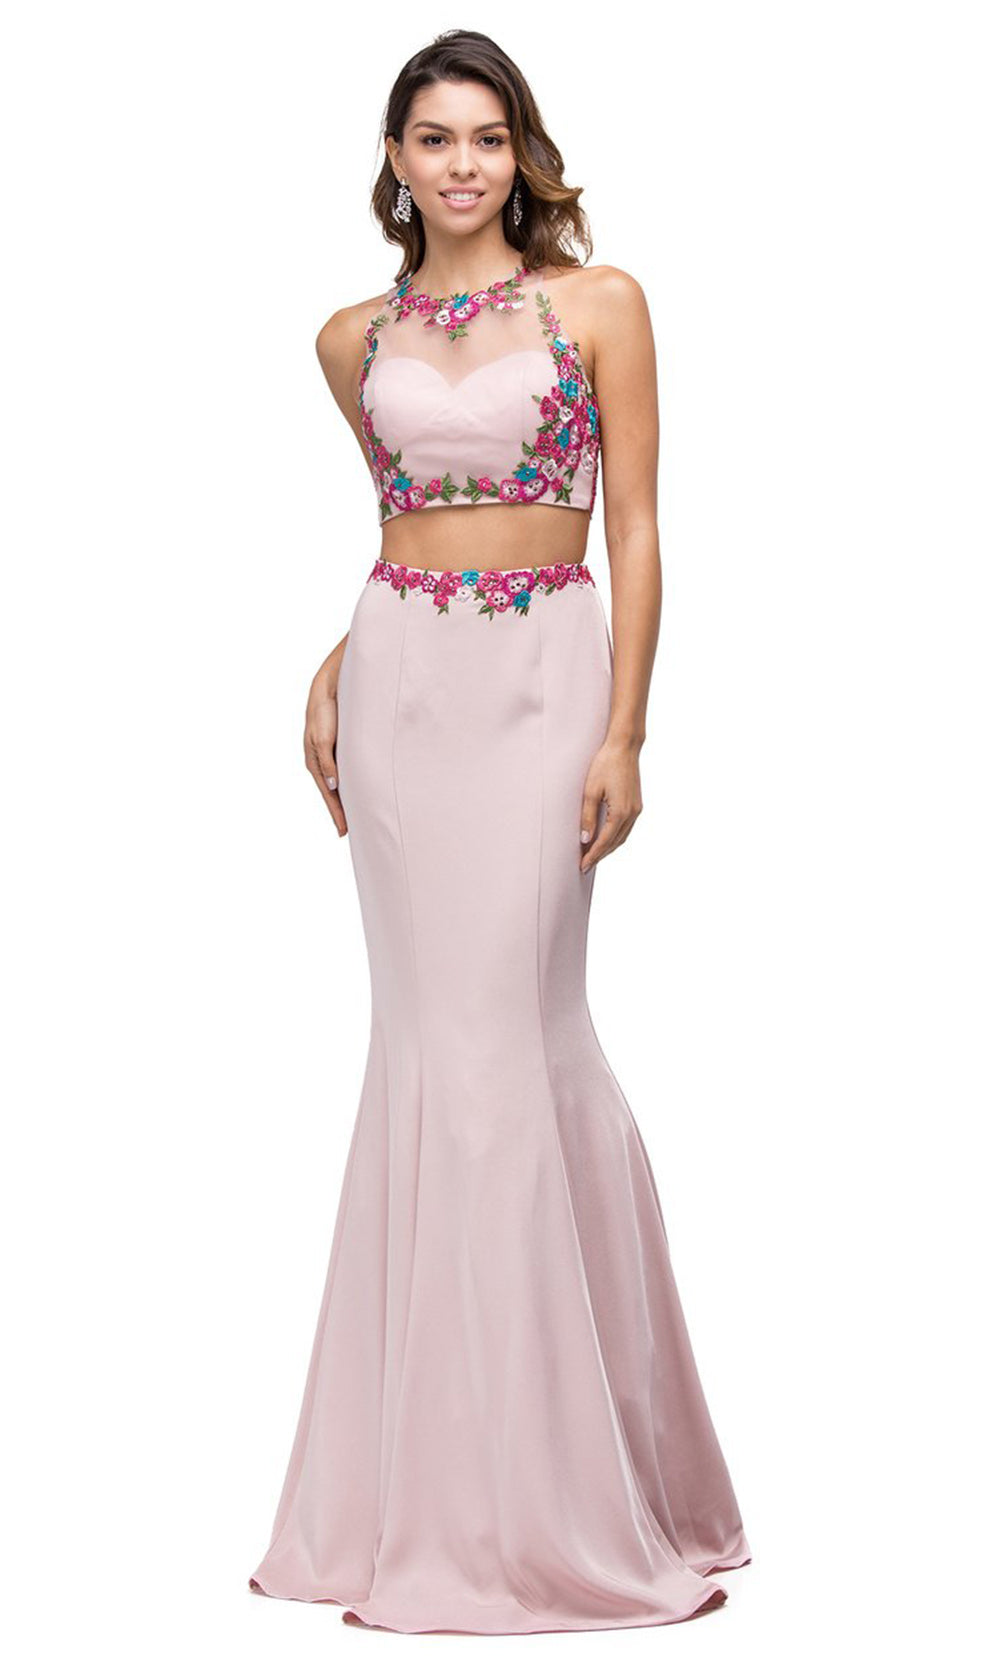 Dancing Queen - 9778 Two Piece Embroidered Mermaid Dress In Pink